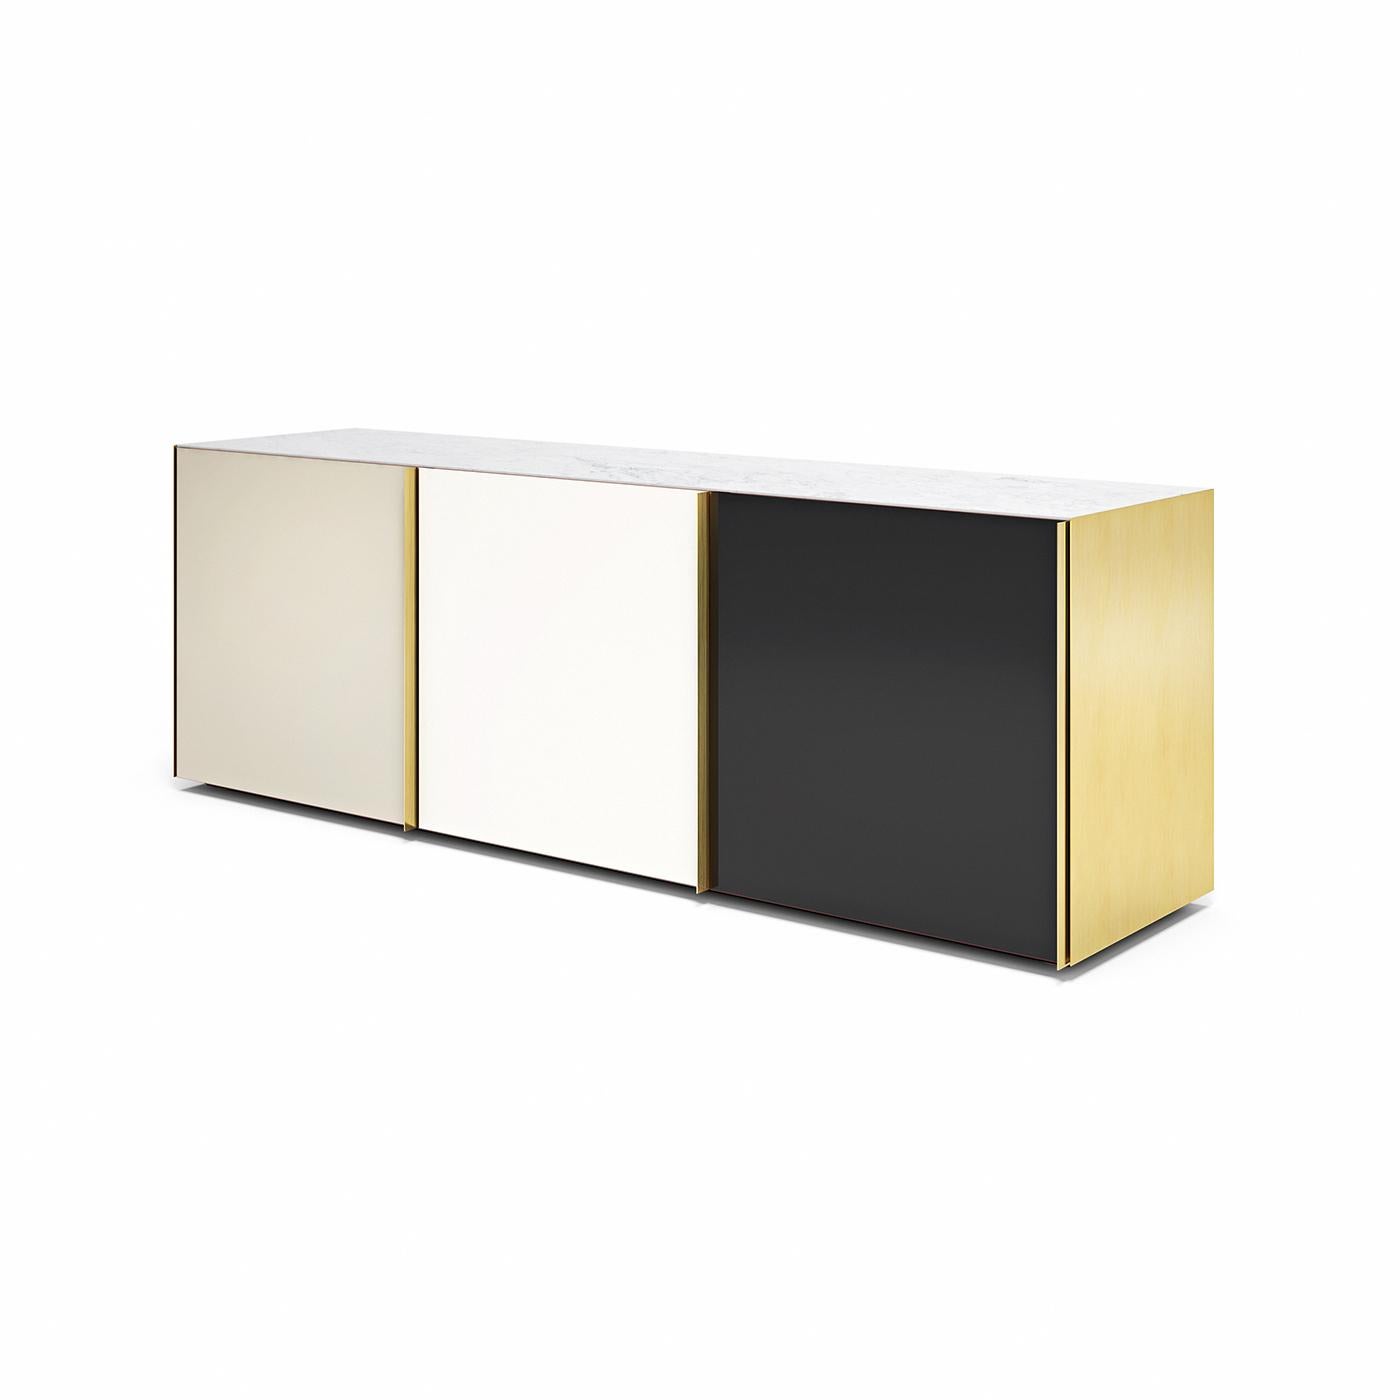 This modern sideboard boasts a solid, lacquered wooden structure, paired with glass shelves and doors. All the doors are back-painted in neutral tones to instantly lift the mood in any room by producing mesmerizing reflections together with the